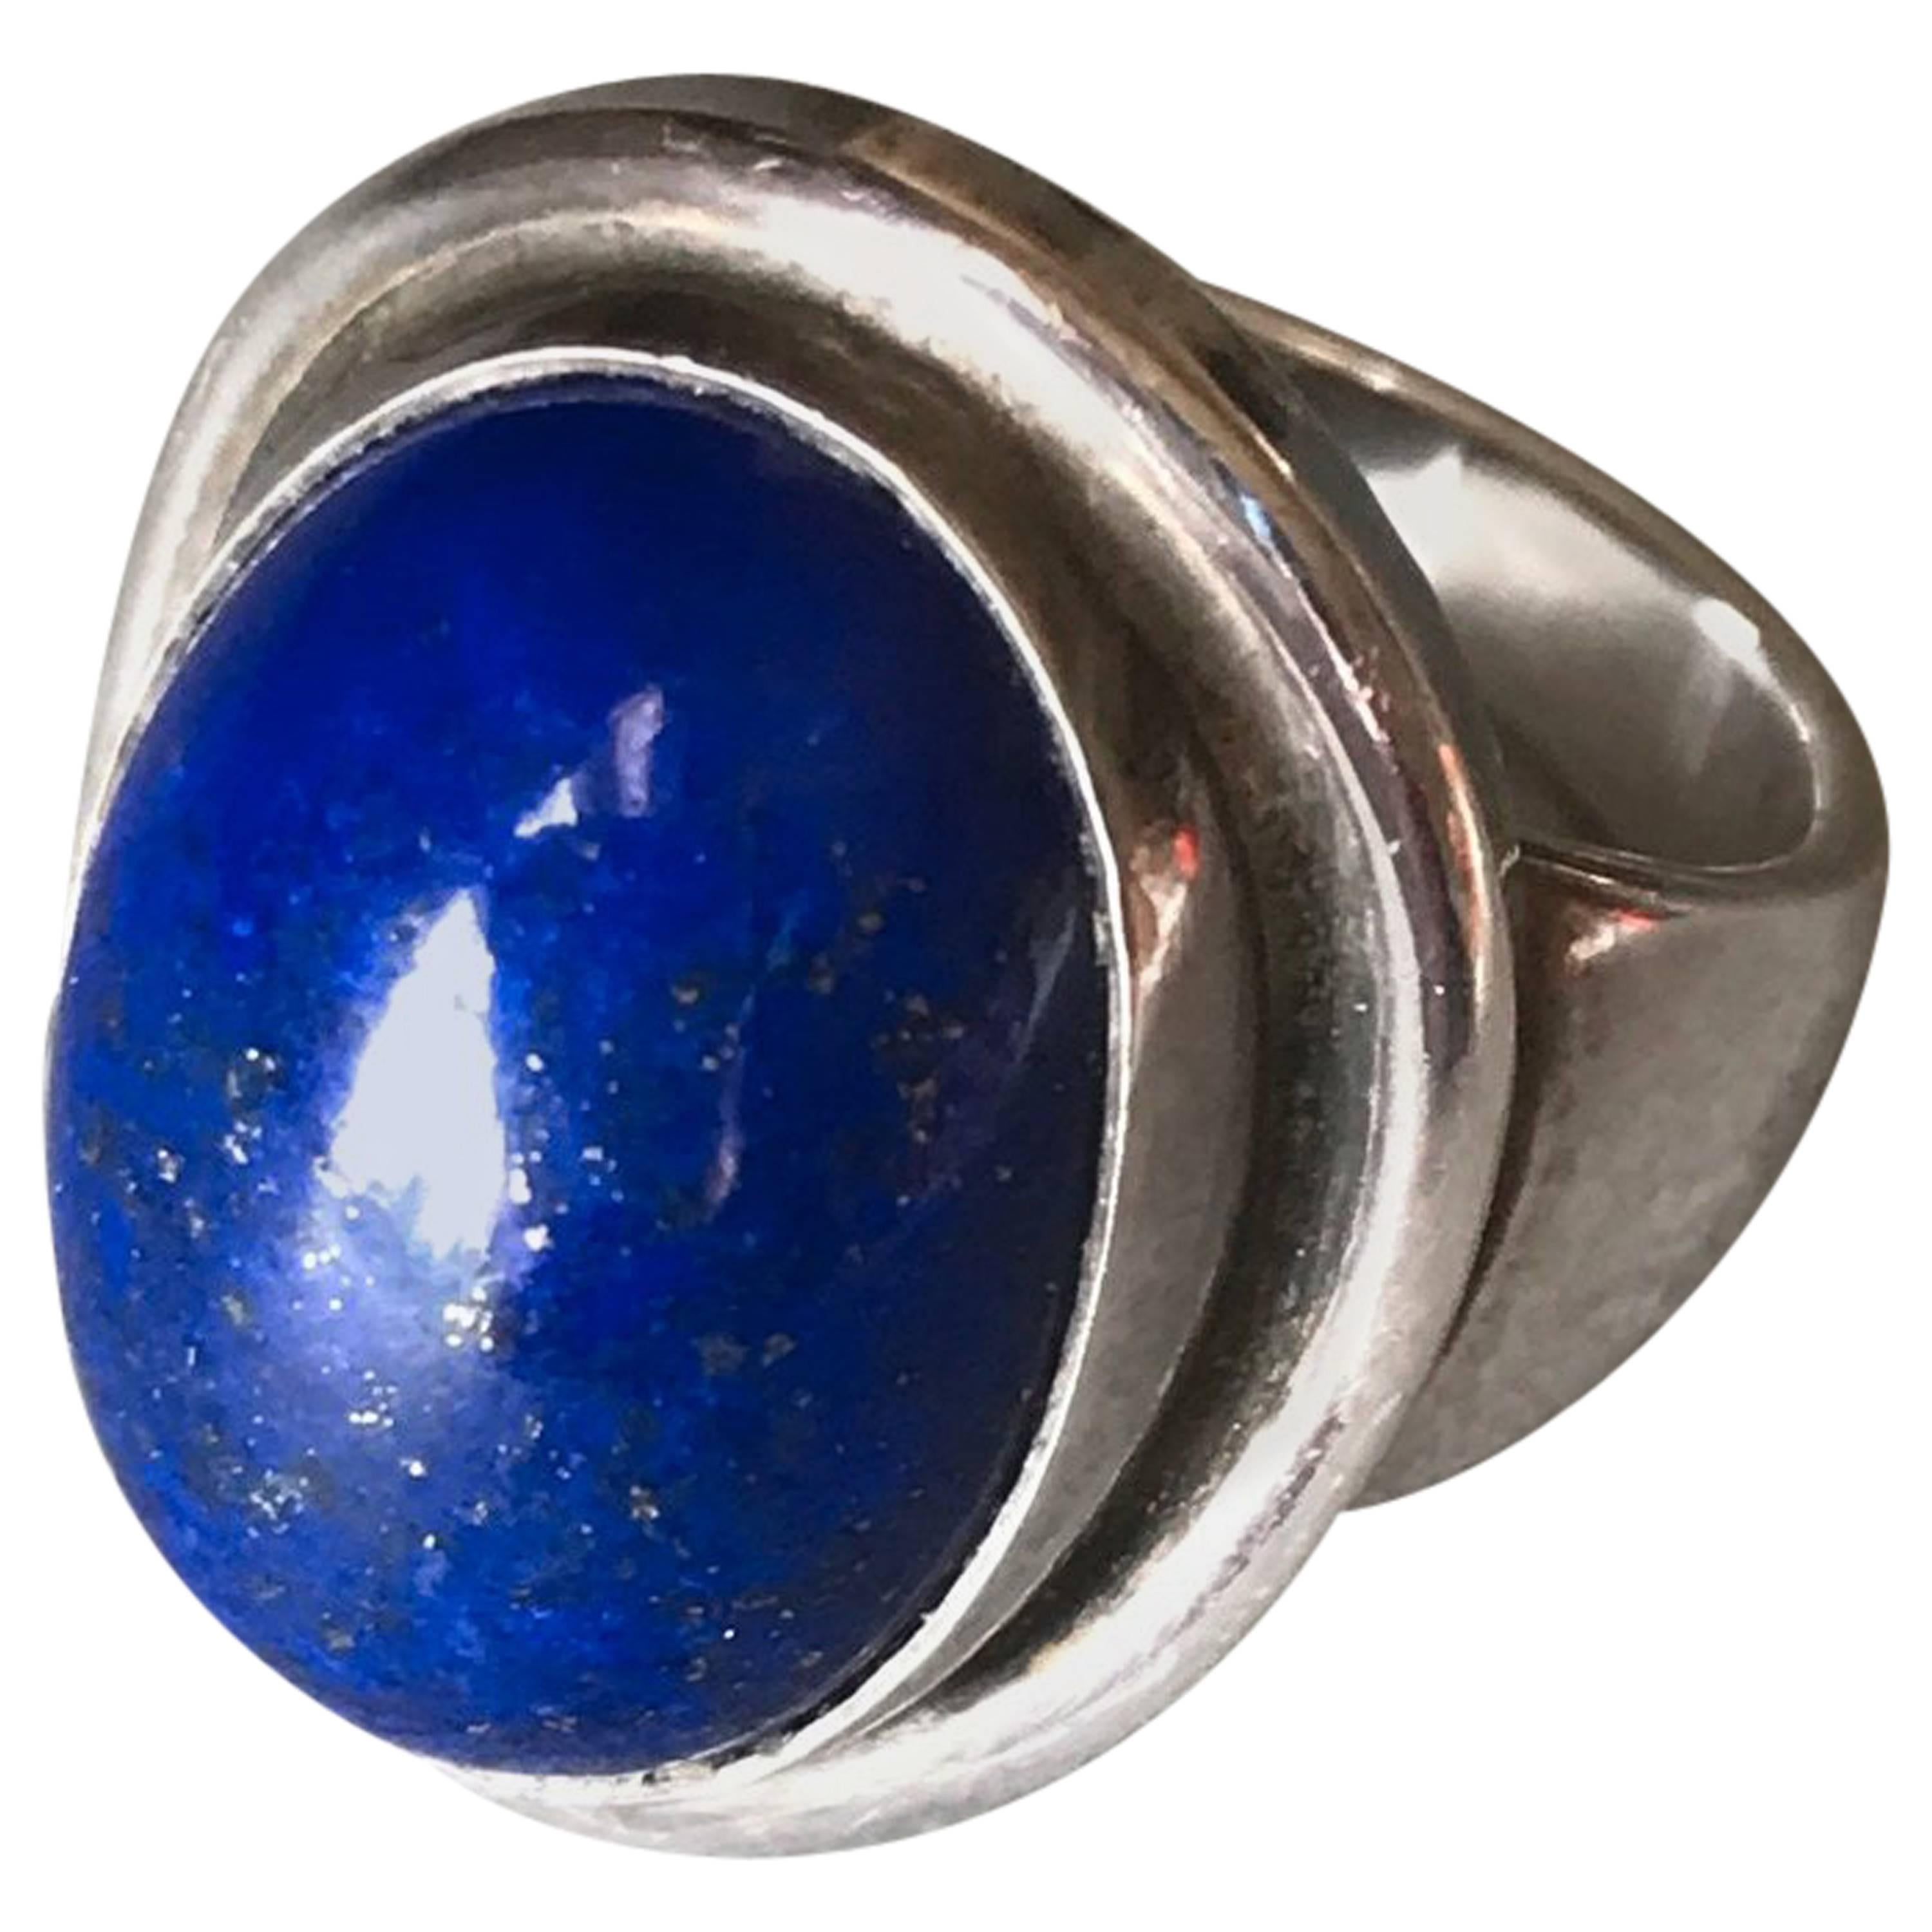 Georg Jensen Sterling Silver Lapis Lazuli Ring No. 46A by Harald Nielsen